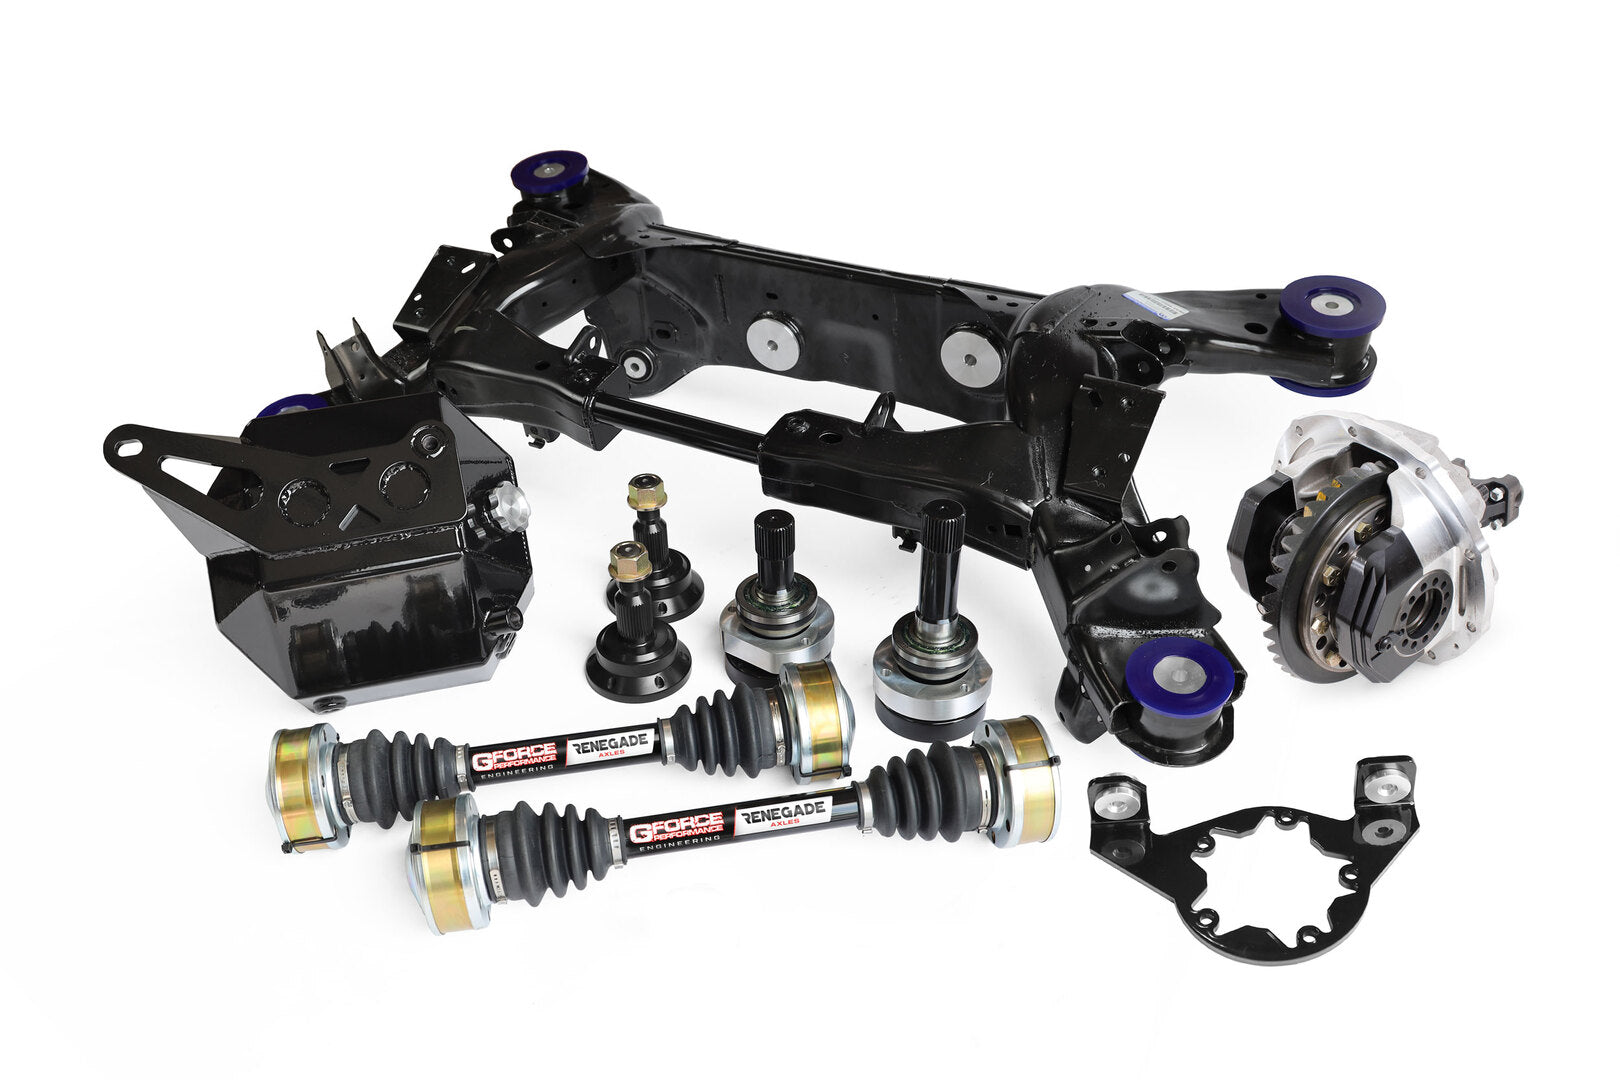 2015-mopar-modified-cradle-complete-9-irs-kit-starting-at-10-049-00-call-for-price-and-configuration-1